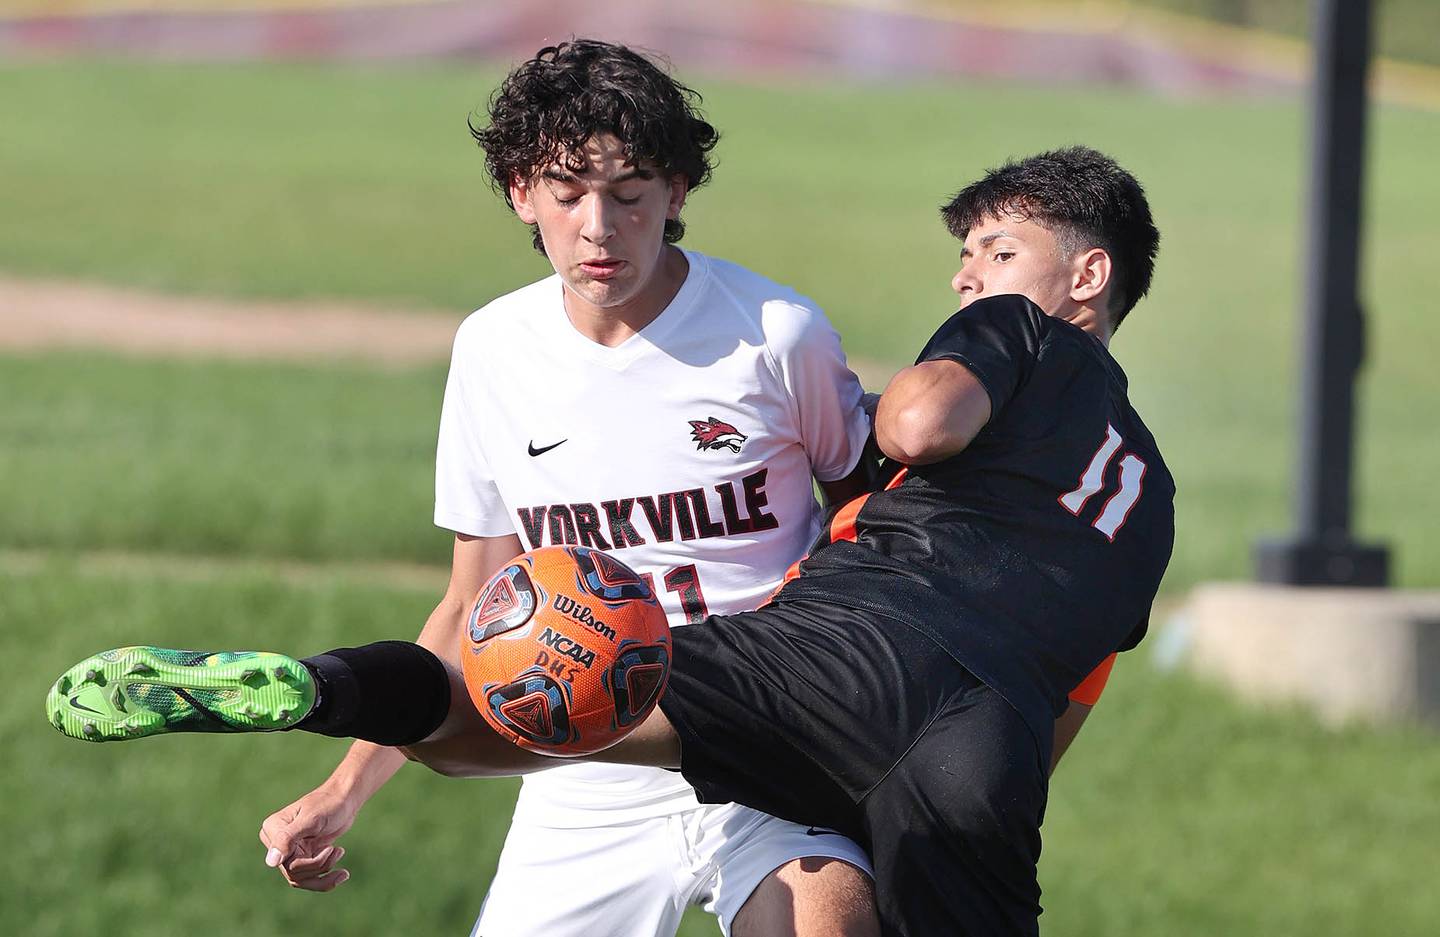 Yorkville's Lukas Kleronomos and DeKalb's Kendall Gilkey get tangled up going after a ball during their game Thursday, Aug. 25, 2022, in the Barb Cup at the Northern Illinois University Outdoor Recreation Sports Complex.